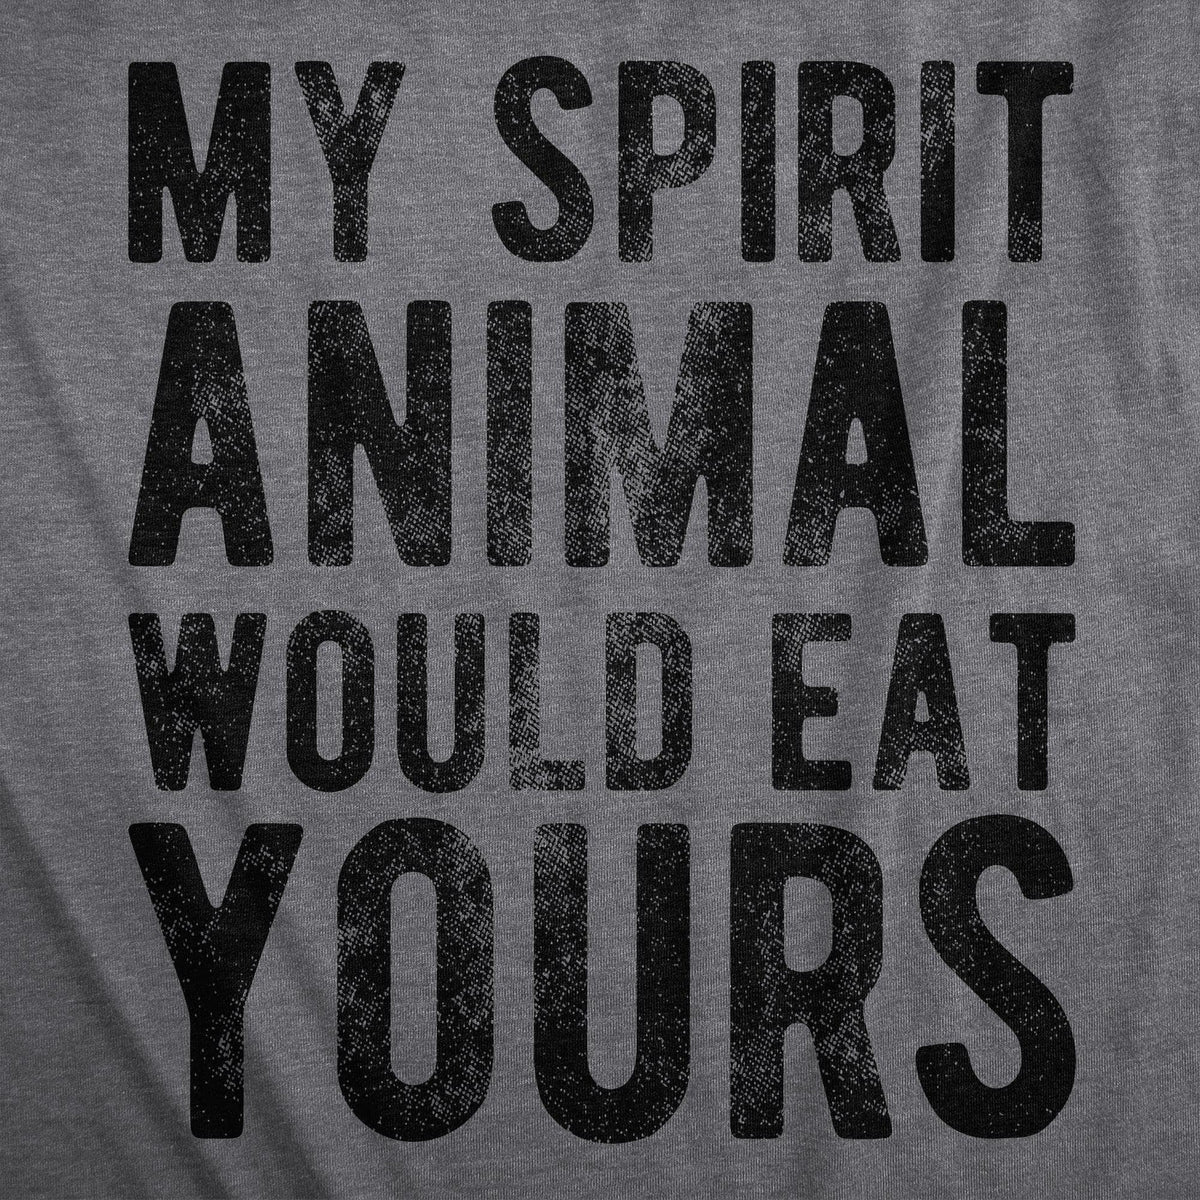 My Spirit Animal Would Eat Yours Men&#39;s Tshirt  -  Crazy Dog T-Shirts